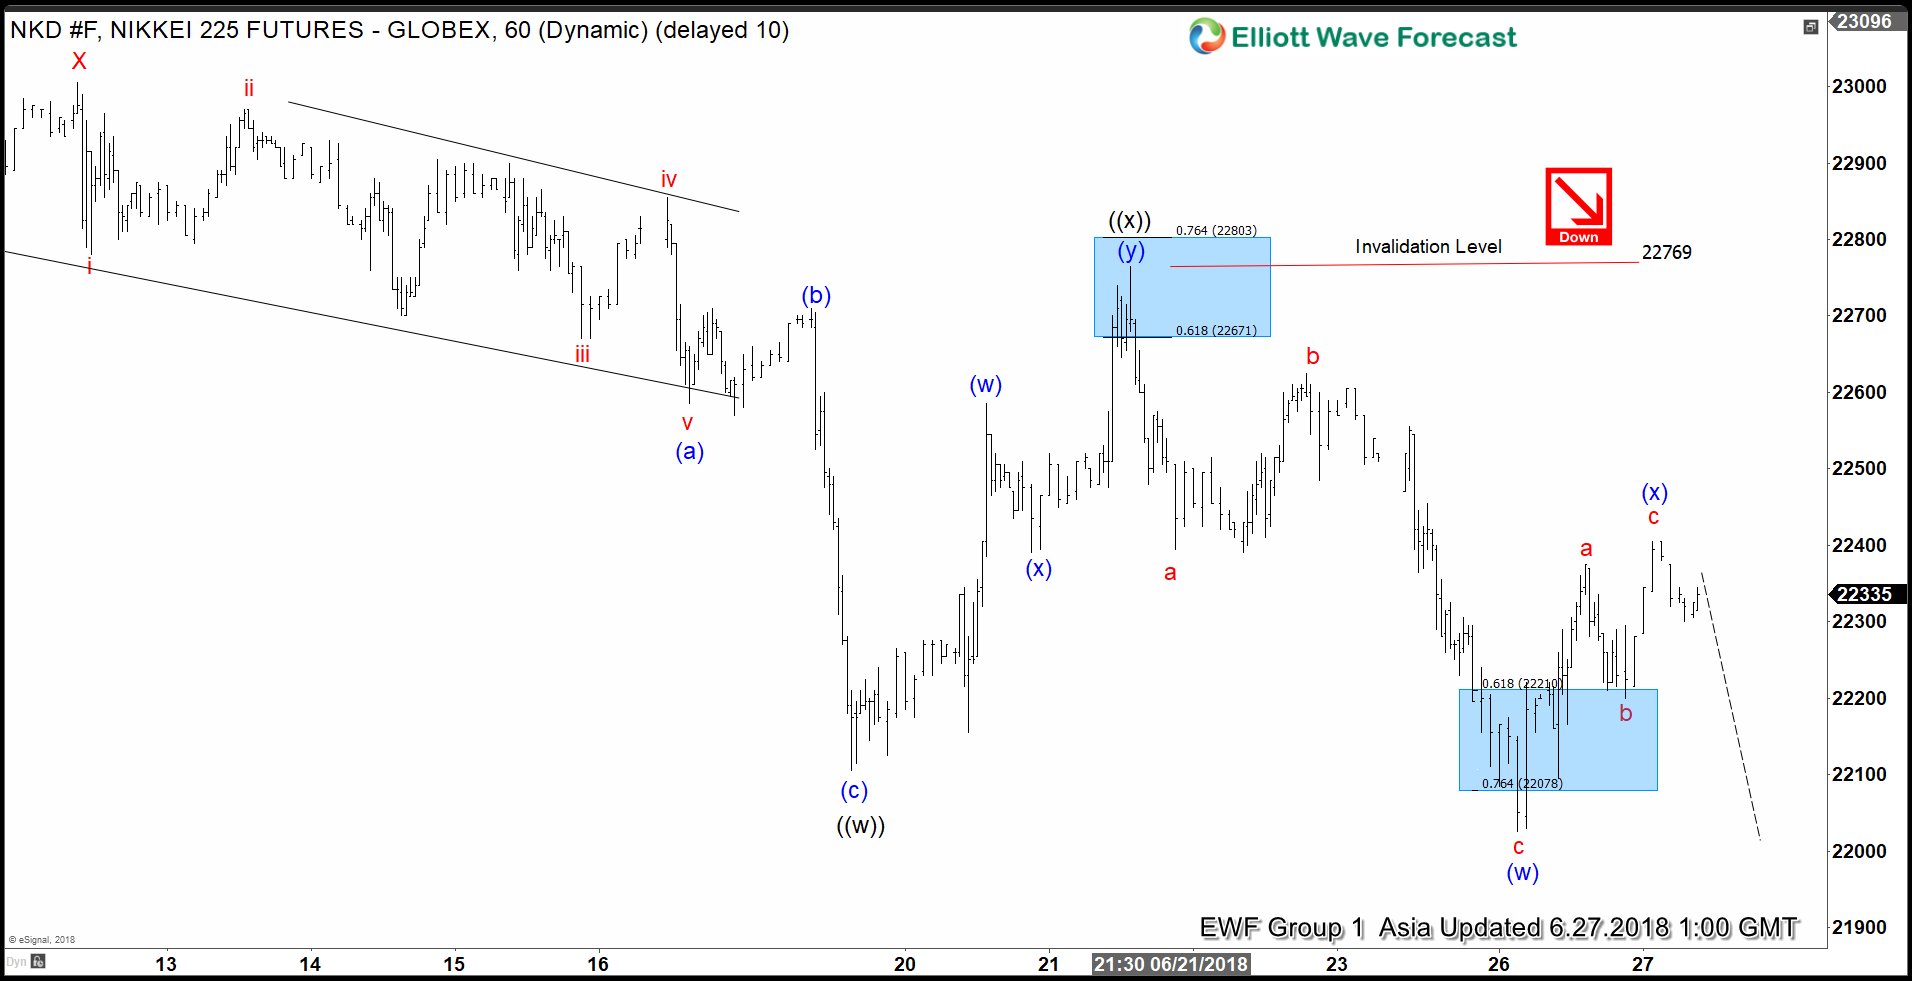 Nikkei How Far Elliott Wave Correction Can Take Place?